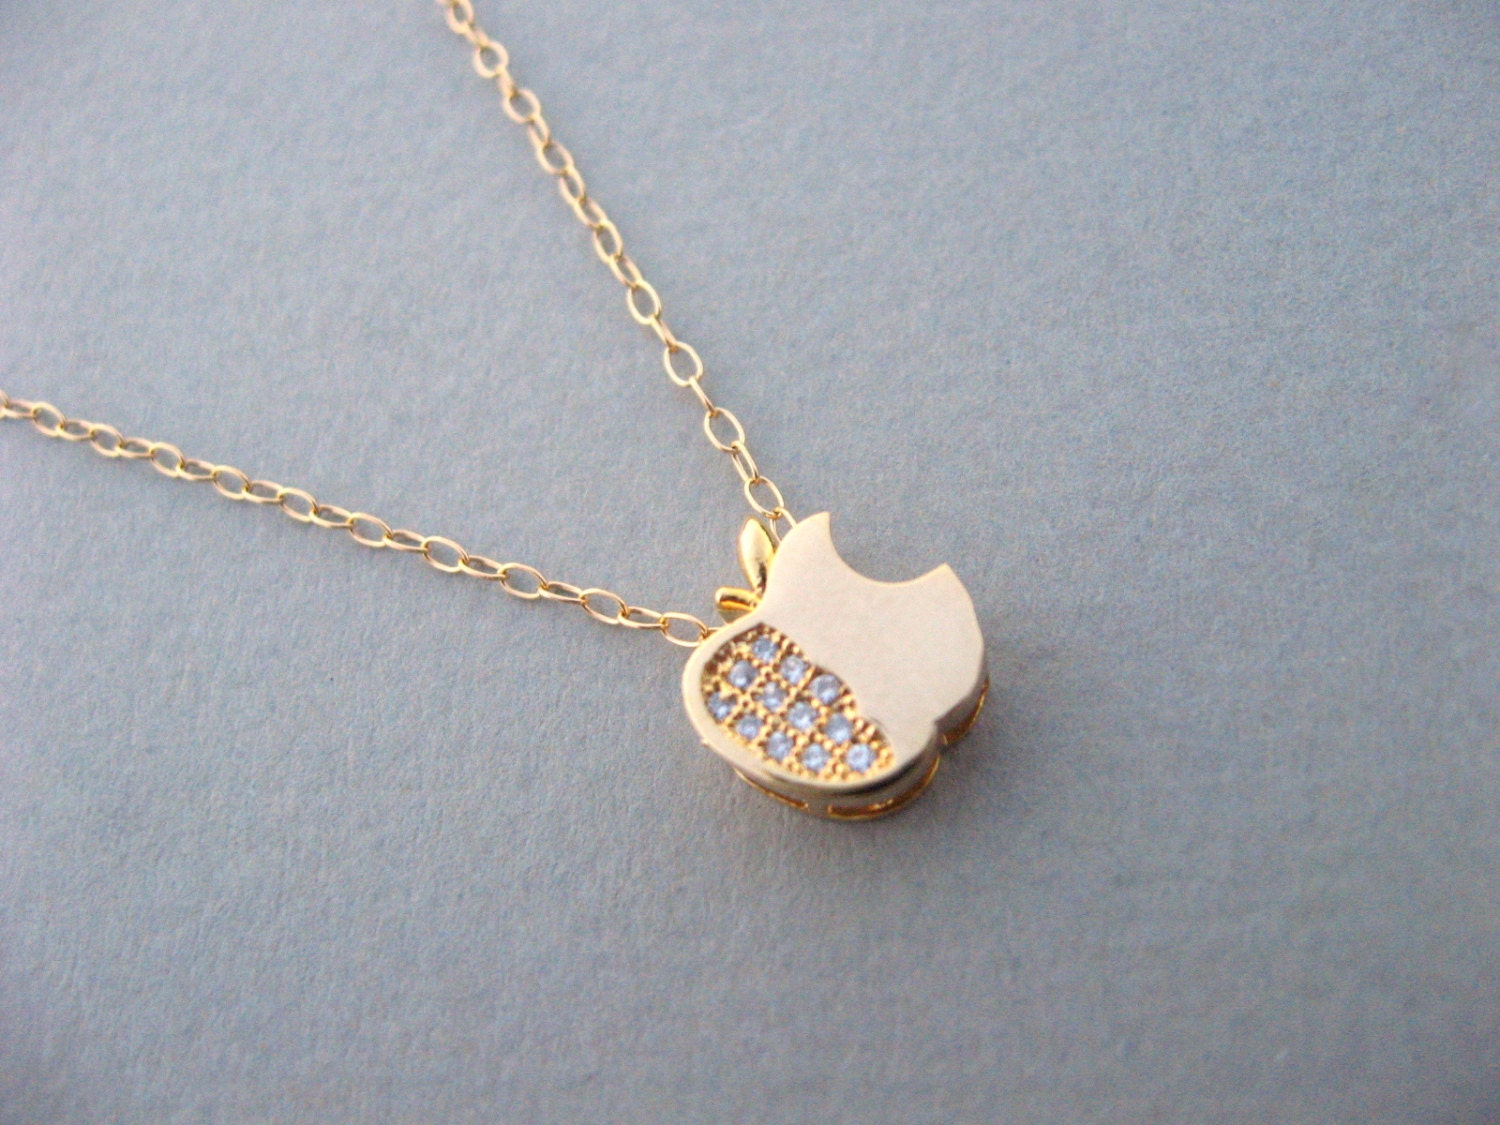 Bitten Apple Necklace Gold Apple Necklace Gold Charm